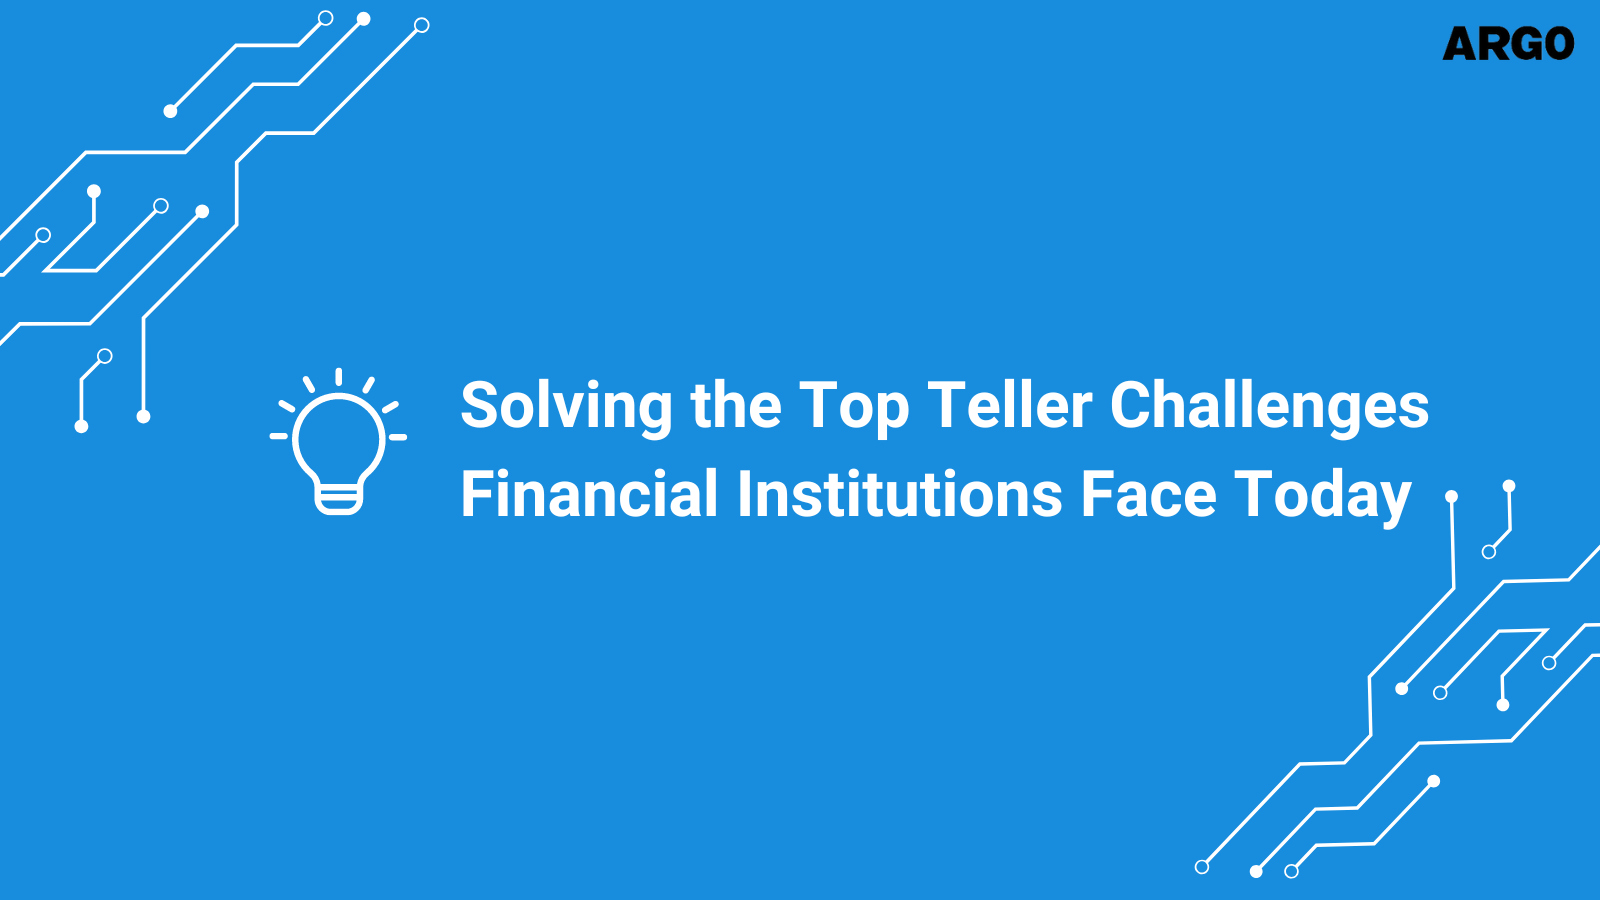 Solving the Top Teller Challenges Financial Institutions Face Today